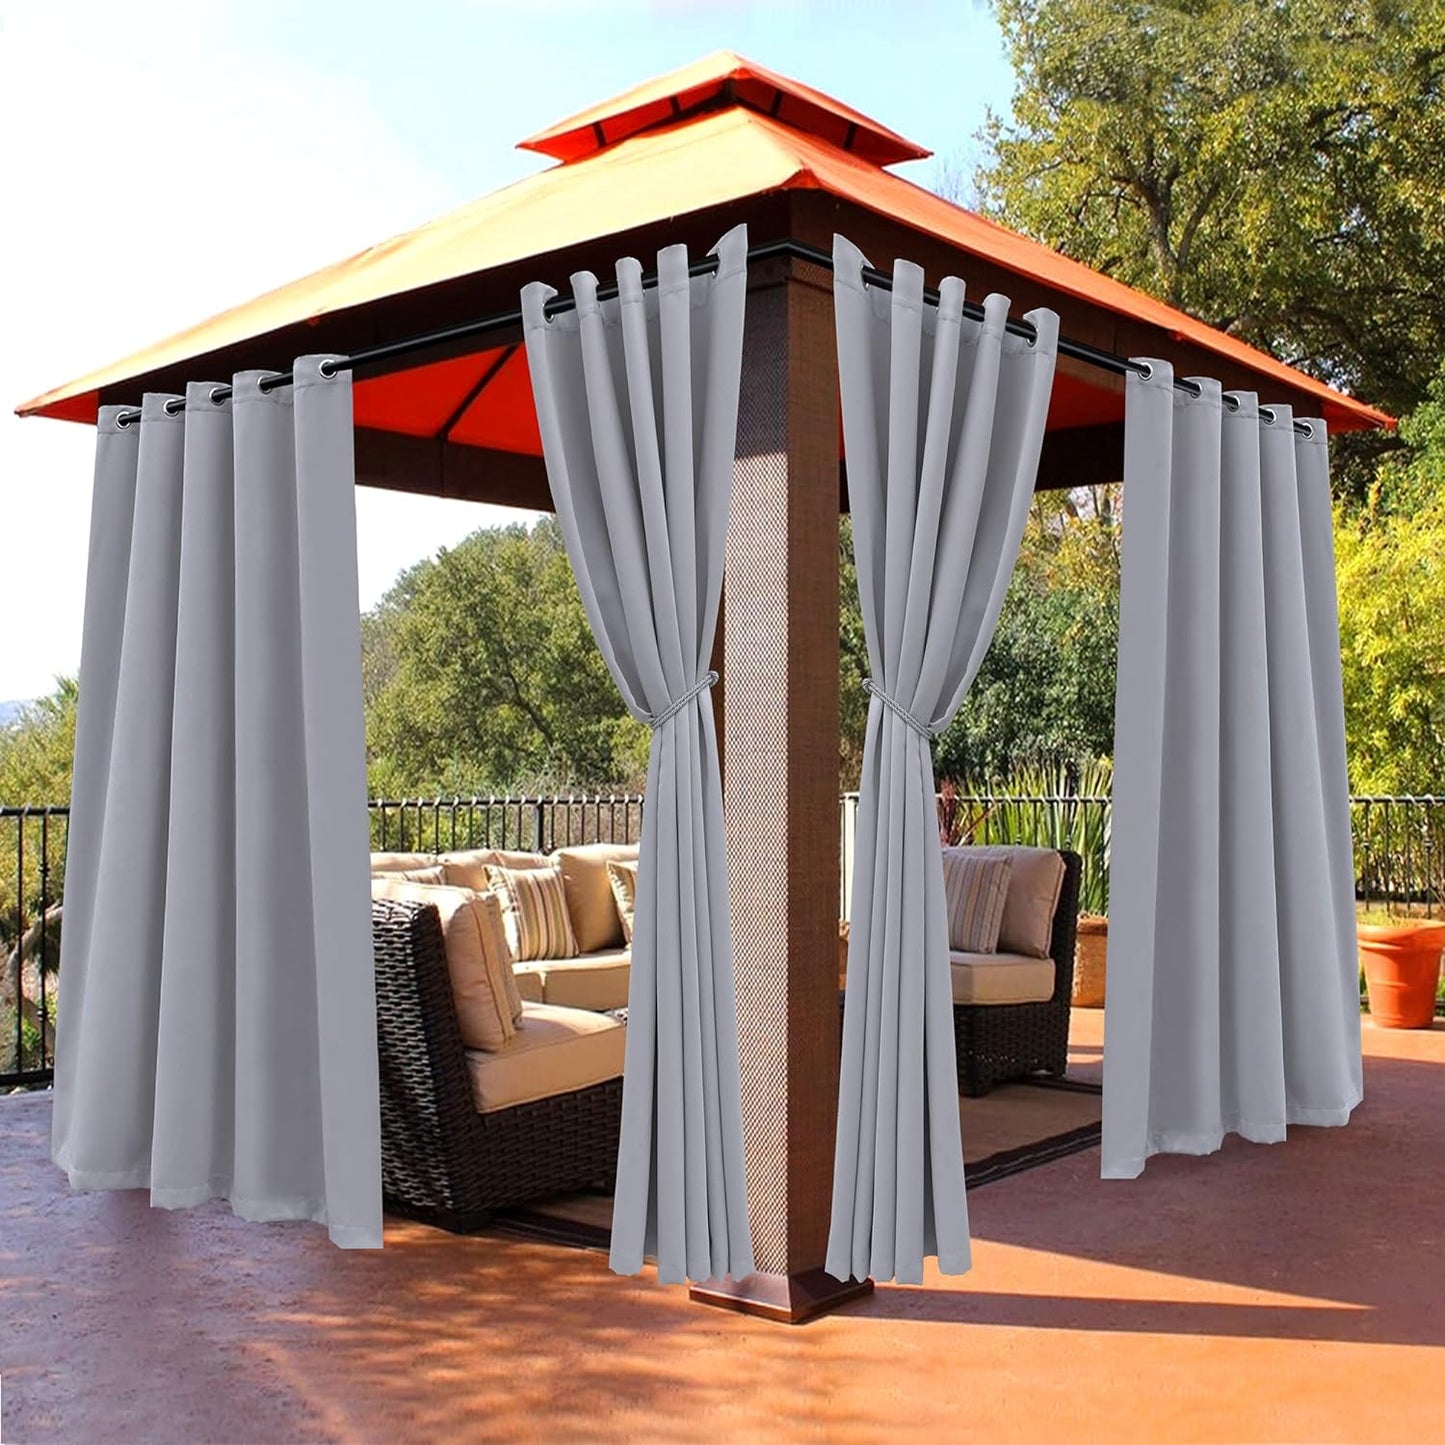 BONZER Outdoor Curtains for Patio Waterproof - Light Blocking Weather Resistant Privacy Grommet Blackout Curtains for Gazebo, Porch, Pergola, Cabana, Deck, Sunroom, 1 Panel, 52W X 84L Inch, Silver  BONZER Silver 70W X 108 Inch 